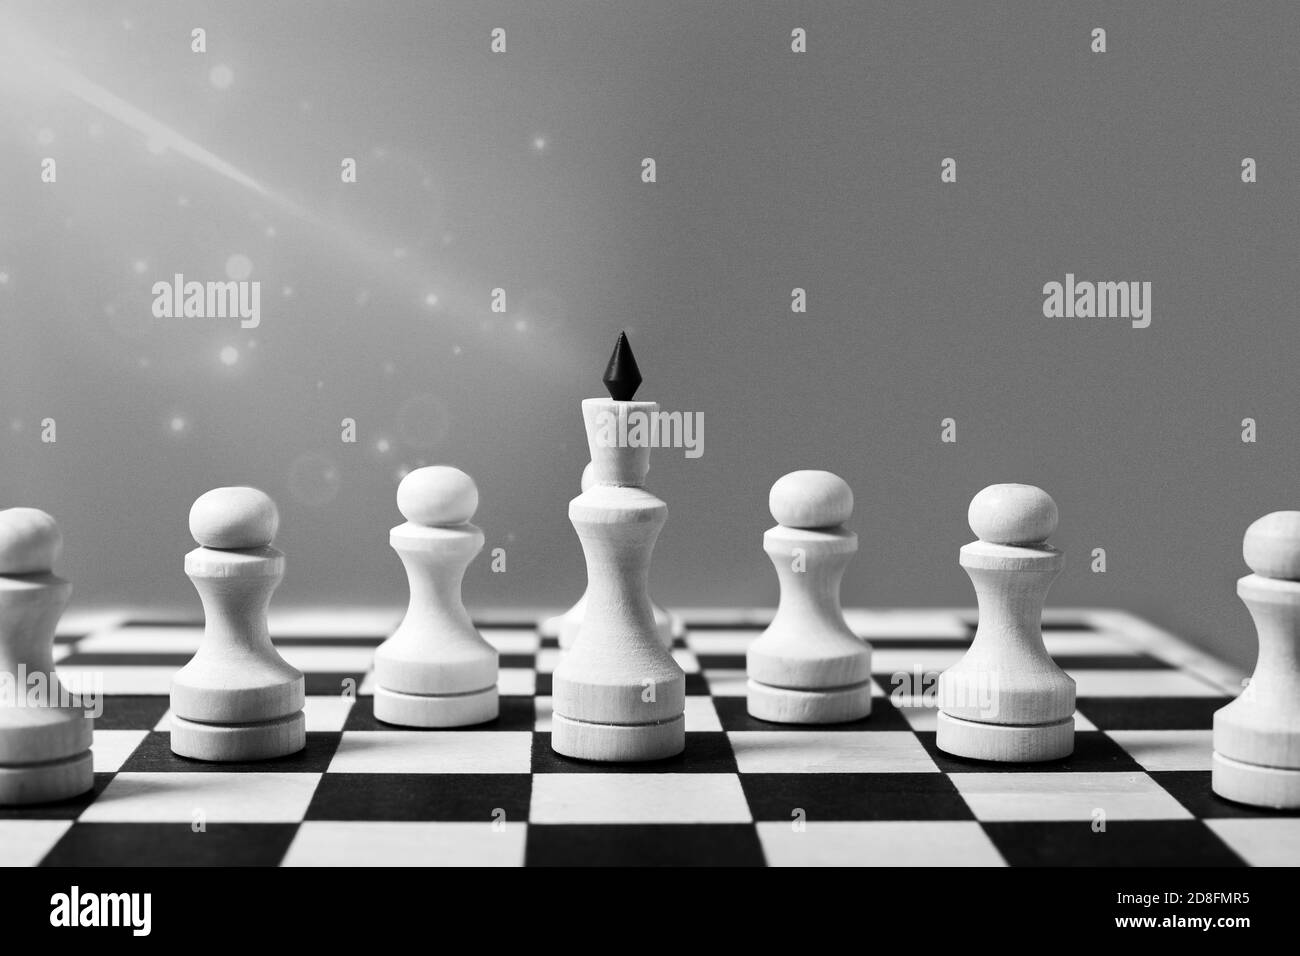 White And Black Chess Board With Figures, Virtual Games And Online Bet.  Concept Of Sports And Cyber Games. Copyspace. 3D Rendering Stock Photo,  Picture and Royalty Free Image. Image 186990210.